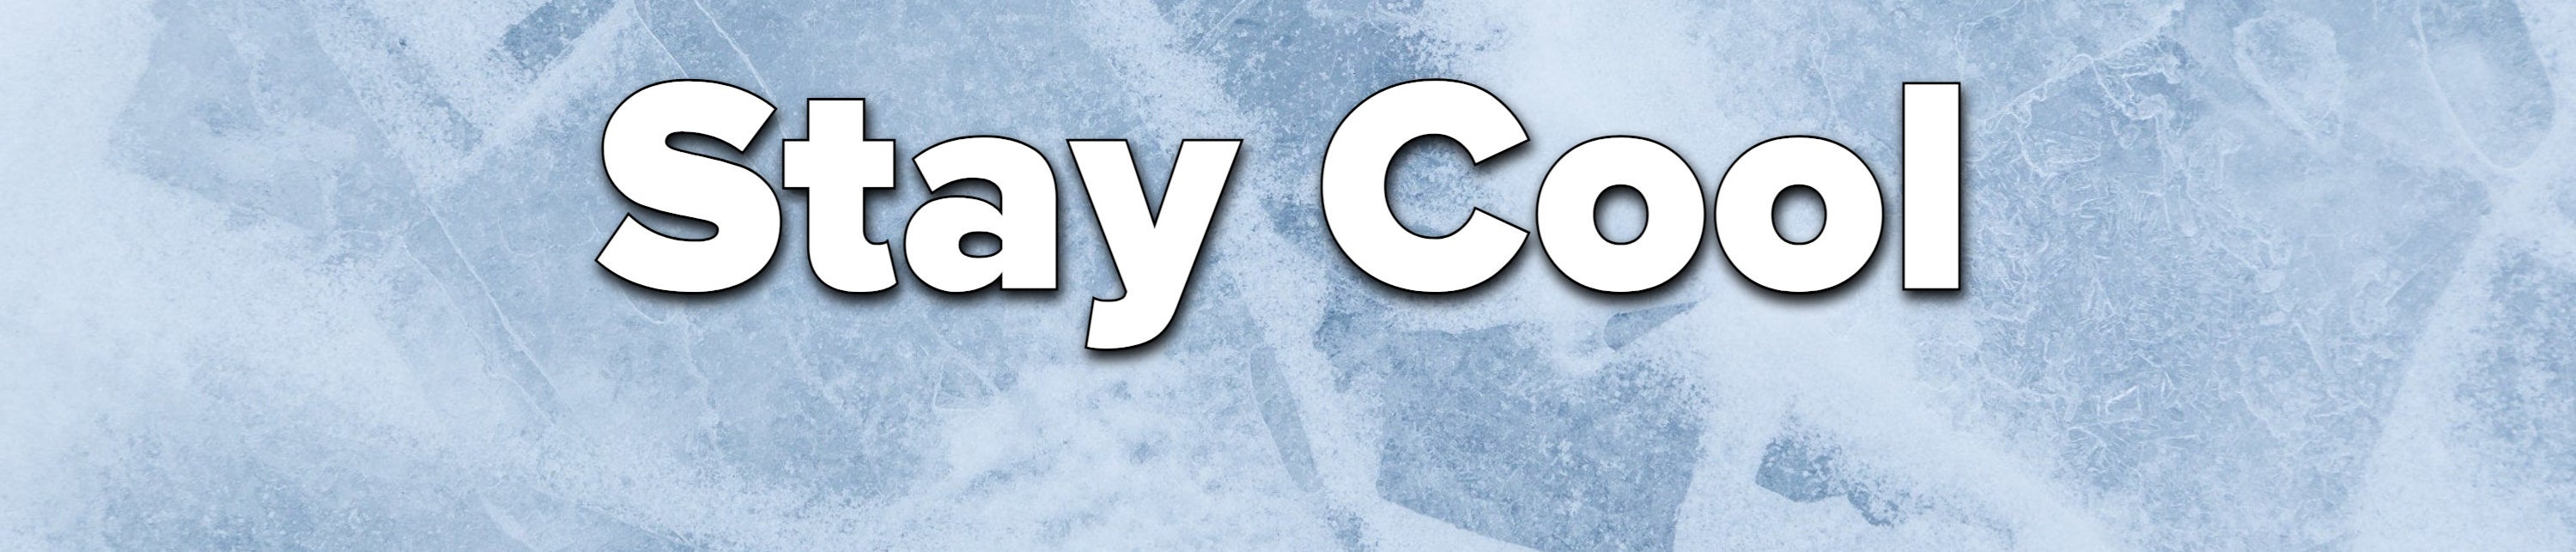 &quot;Stay Cool&quot; text set on a icy background